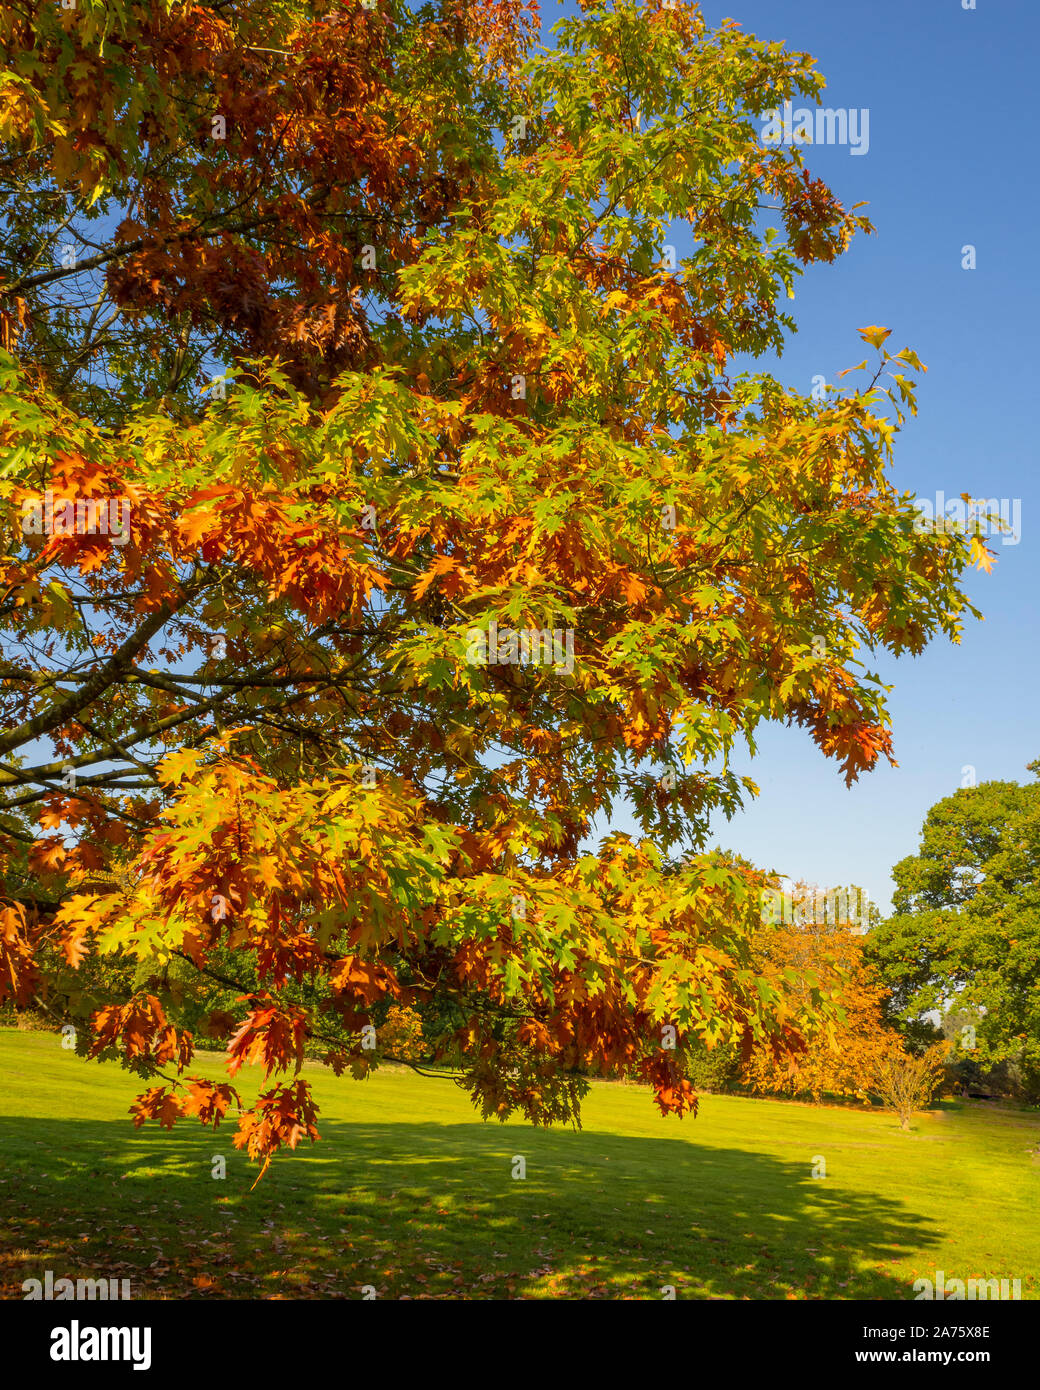 Branches of an oak tree in a park with beautiful autumn foliage against a blue sky Stock Photo